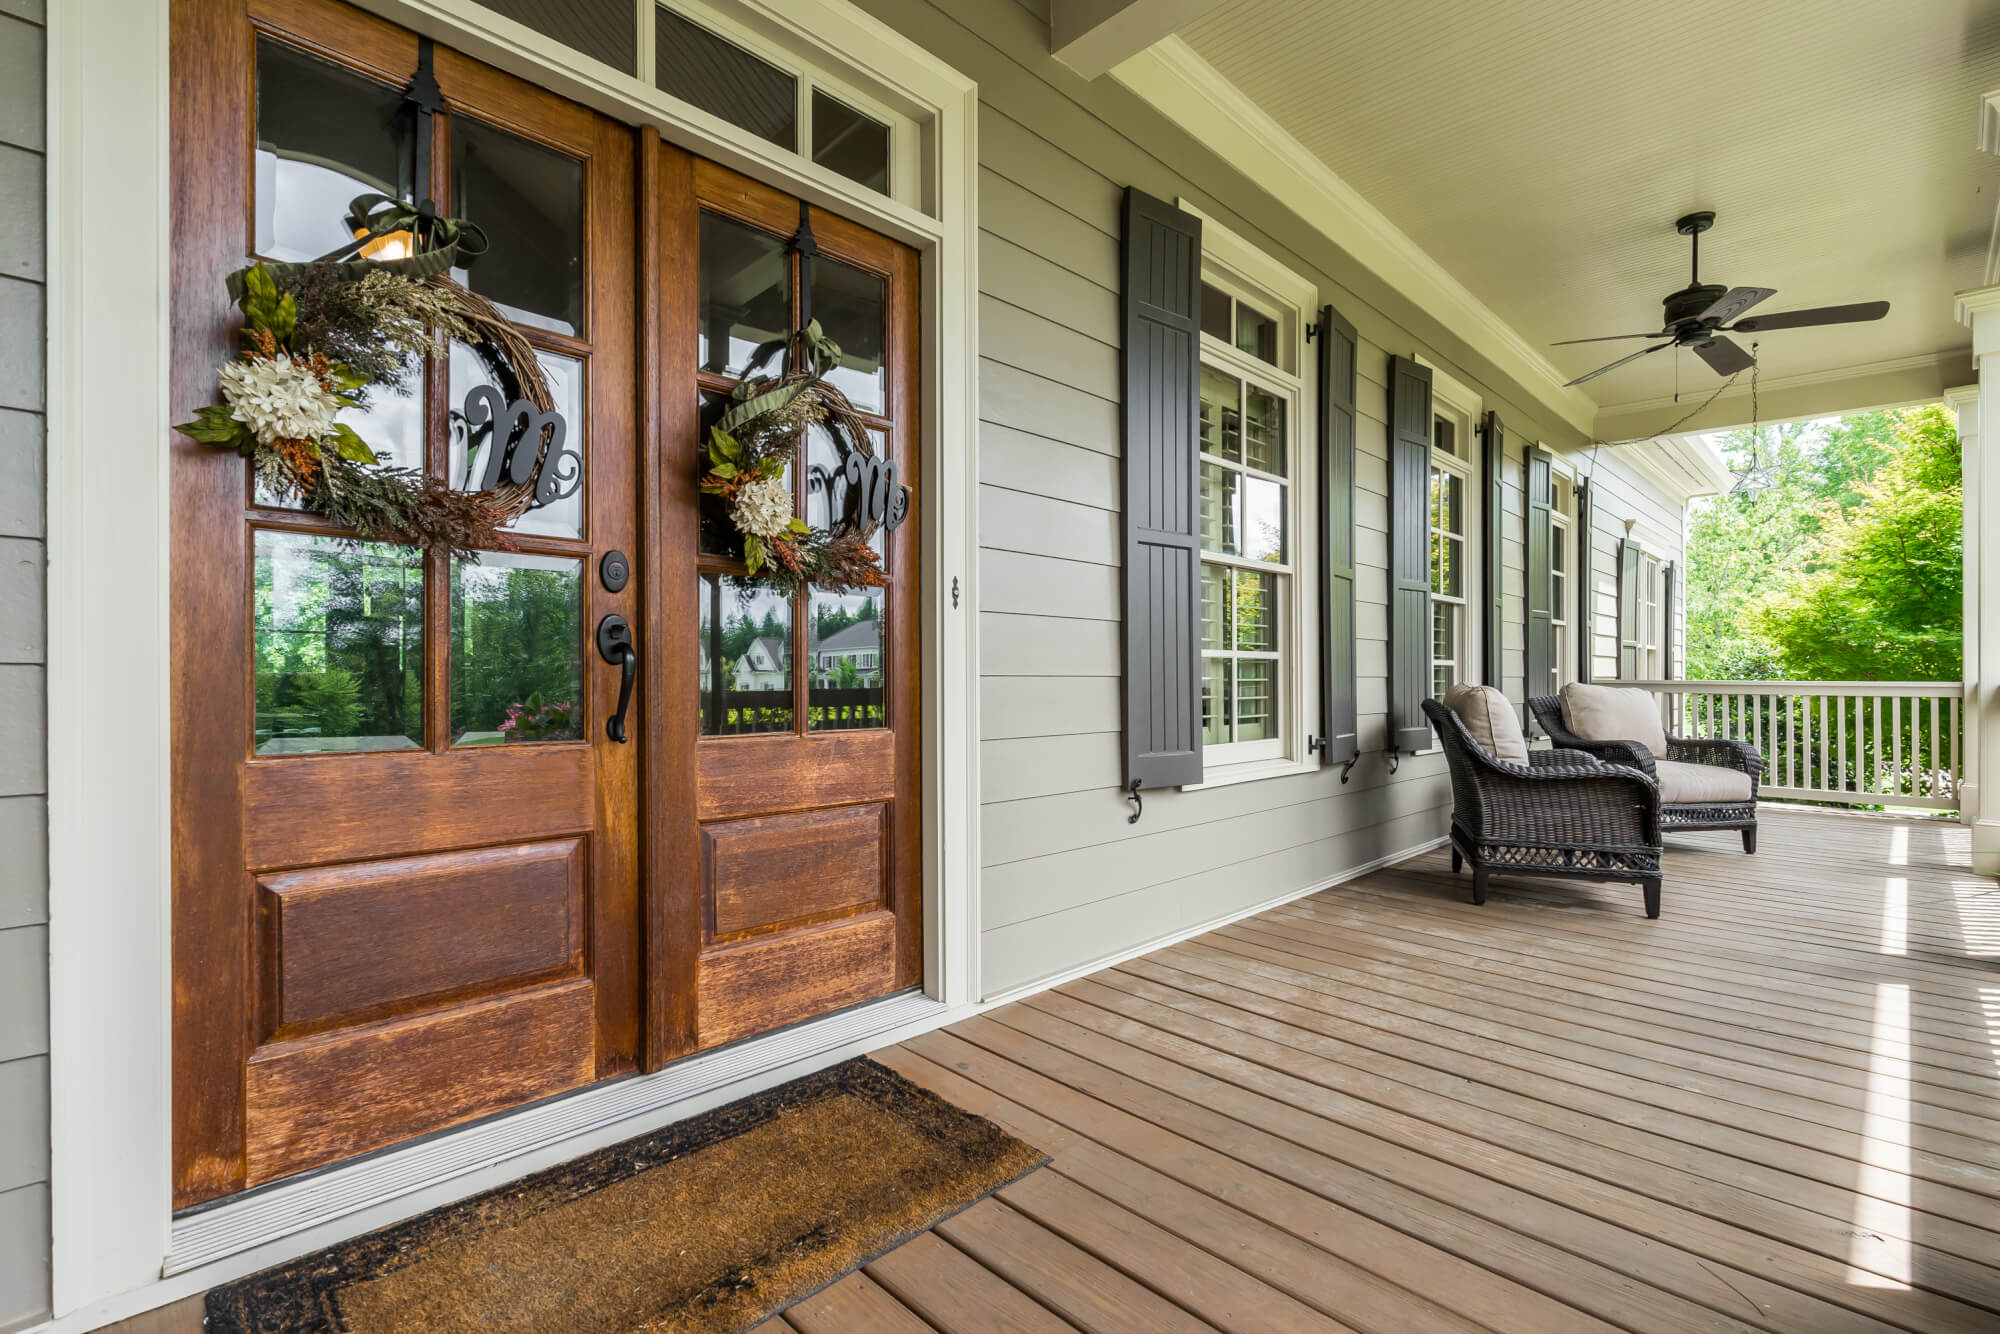 We are here to help you prepare your front porch for spring. 